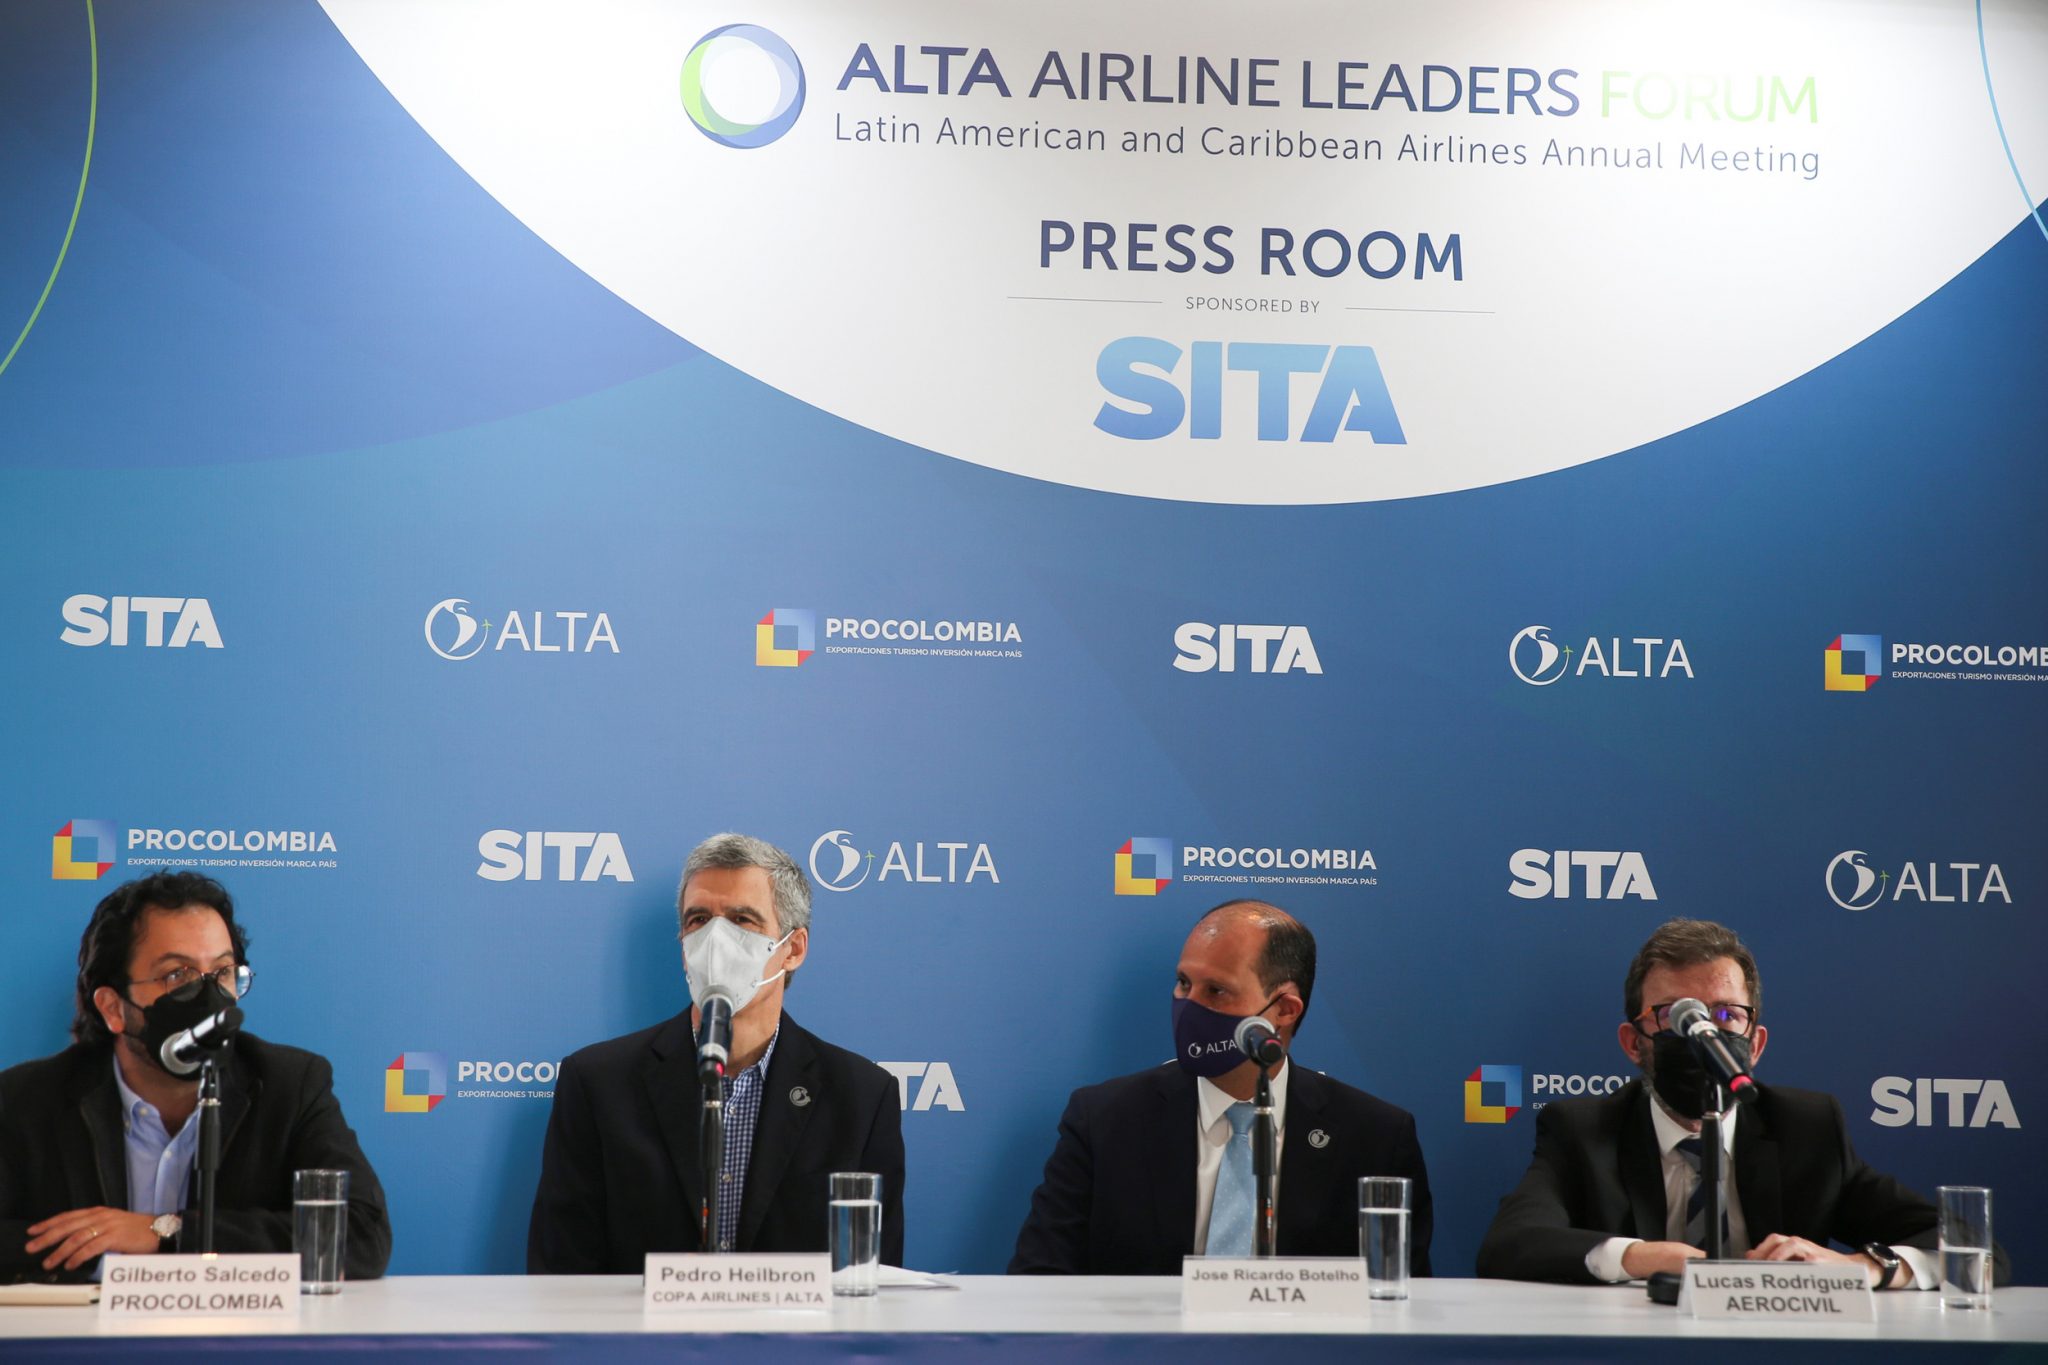 The ALTA Airlines Leaders Forum.